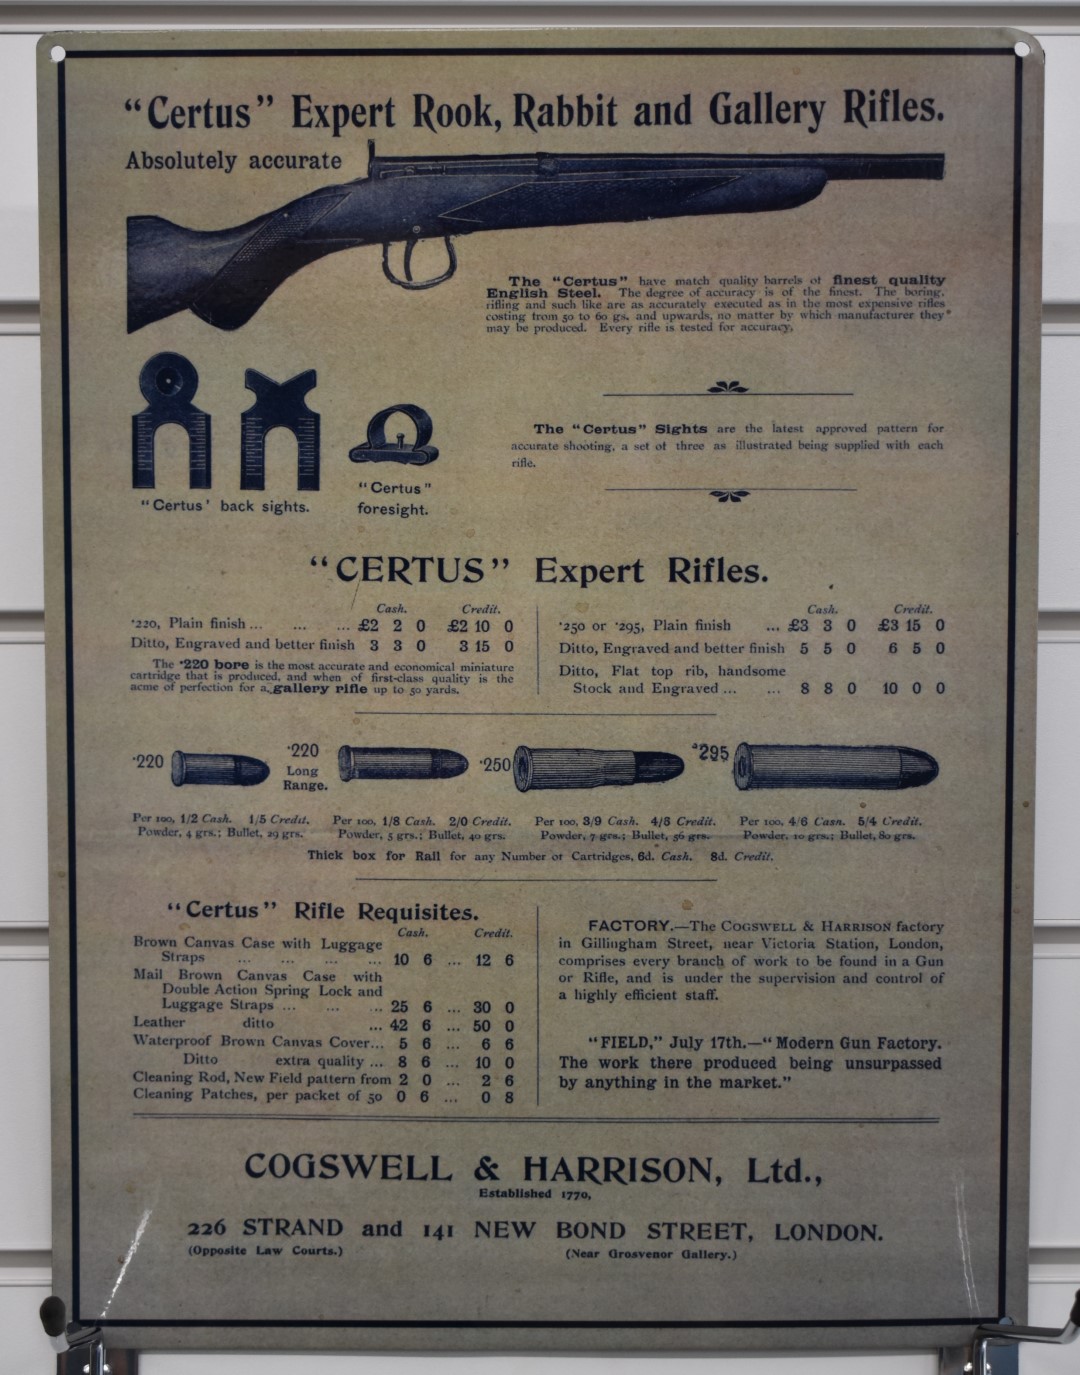 Metal Cogswell & Harrison 'Certus' Expert Rook, Rabbit and Gallery Rifles shop display or